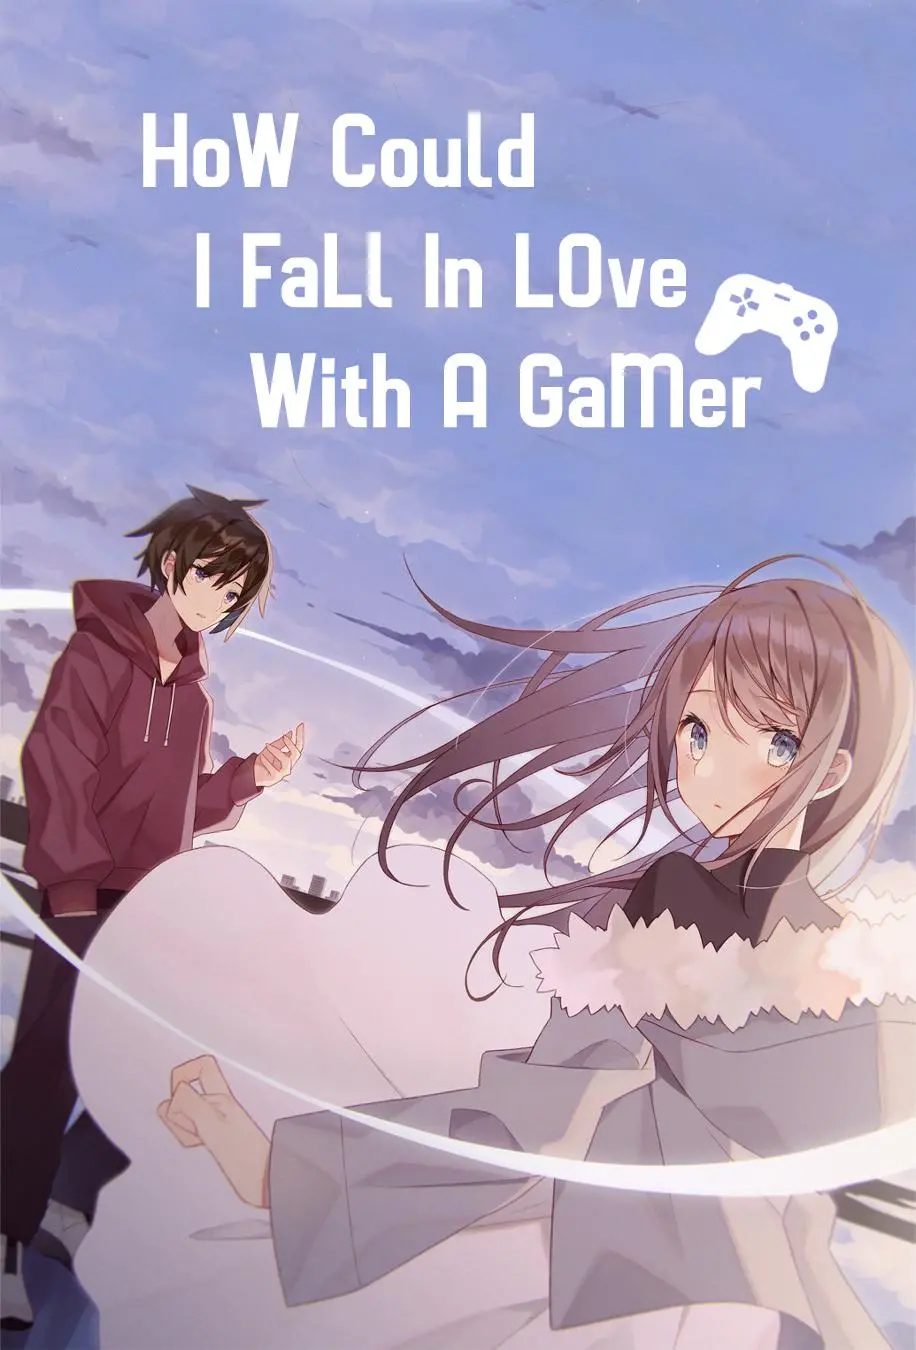 How Could I Fall In Love With a Gamer!